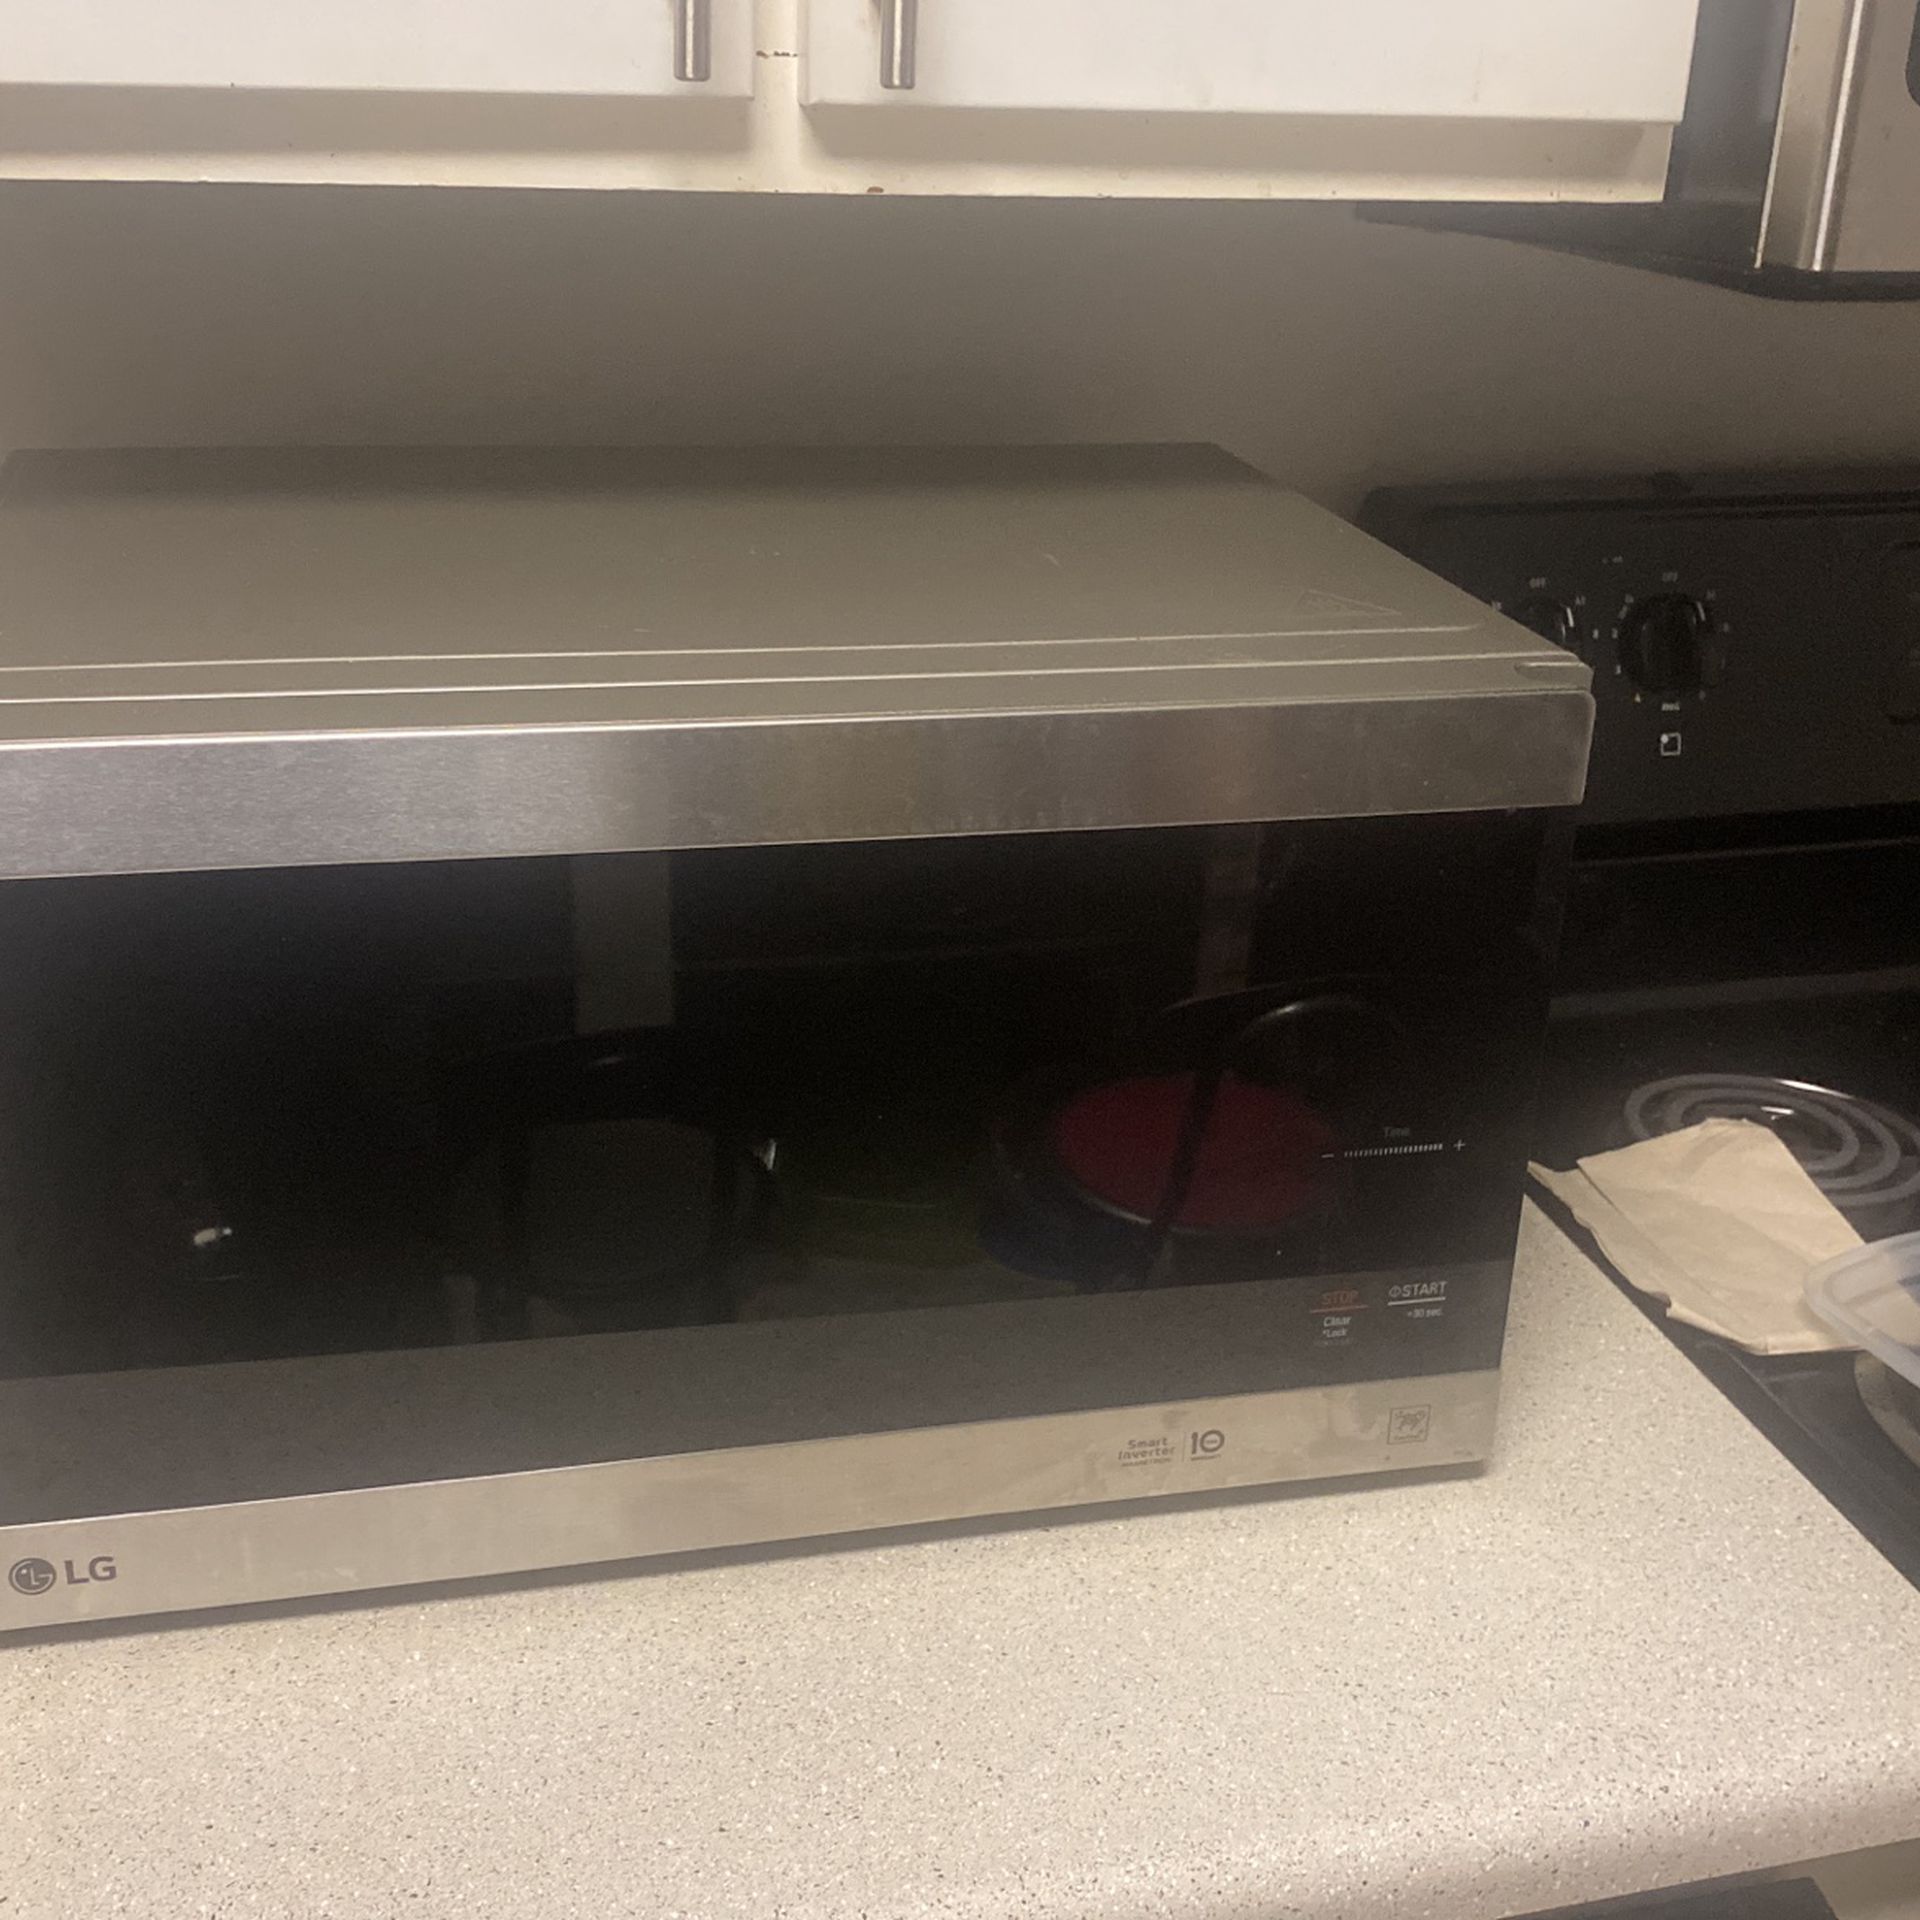 Brand New Microwave Paid 120 For It Asking For At Least 75 